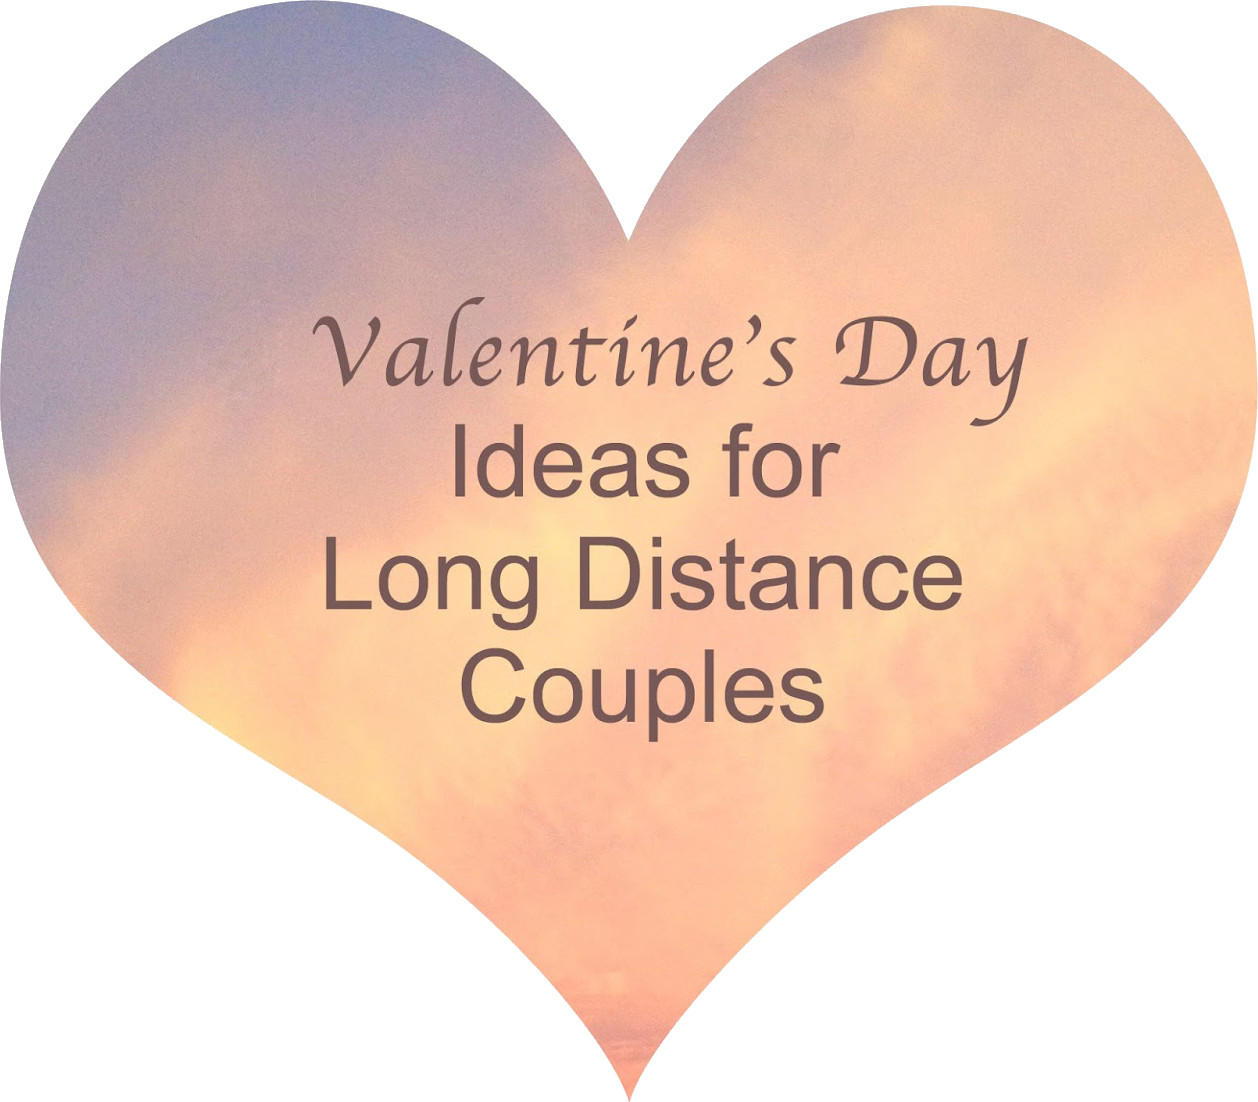 Valentines Day Ideas For Her Long Distance
 Interesting Valentine s Day Ideas for Long Distance